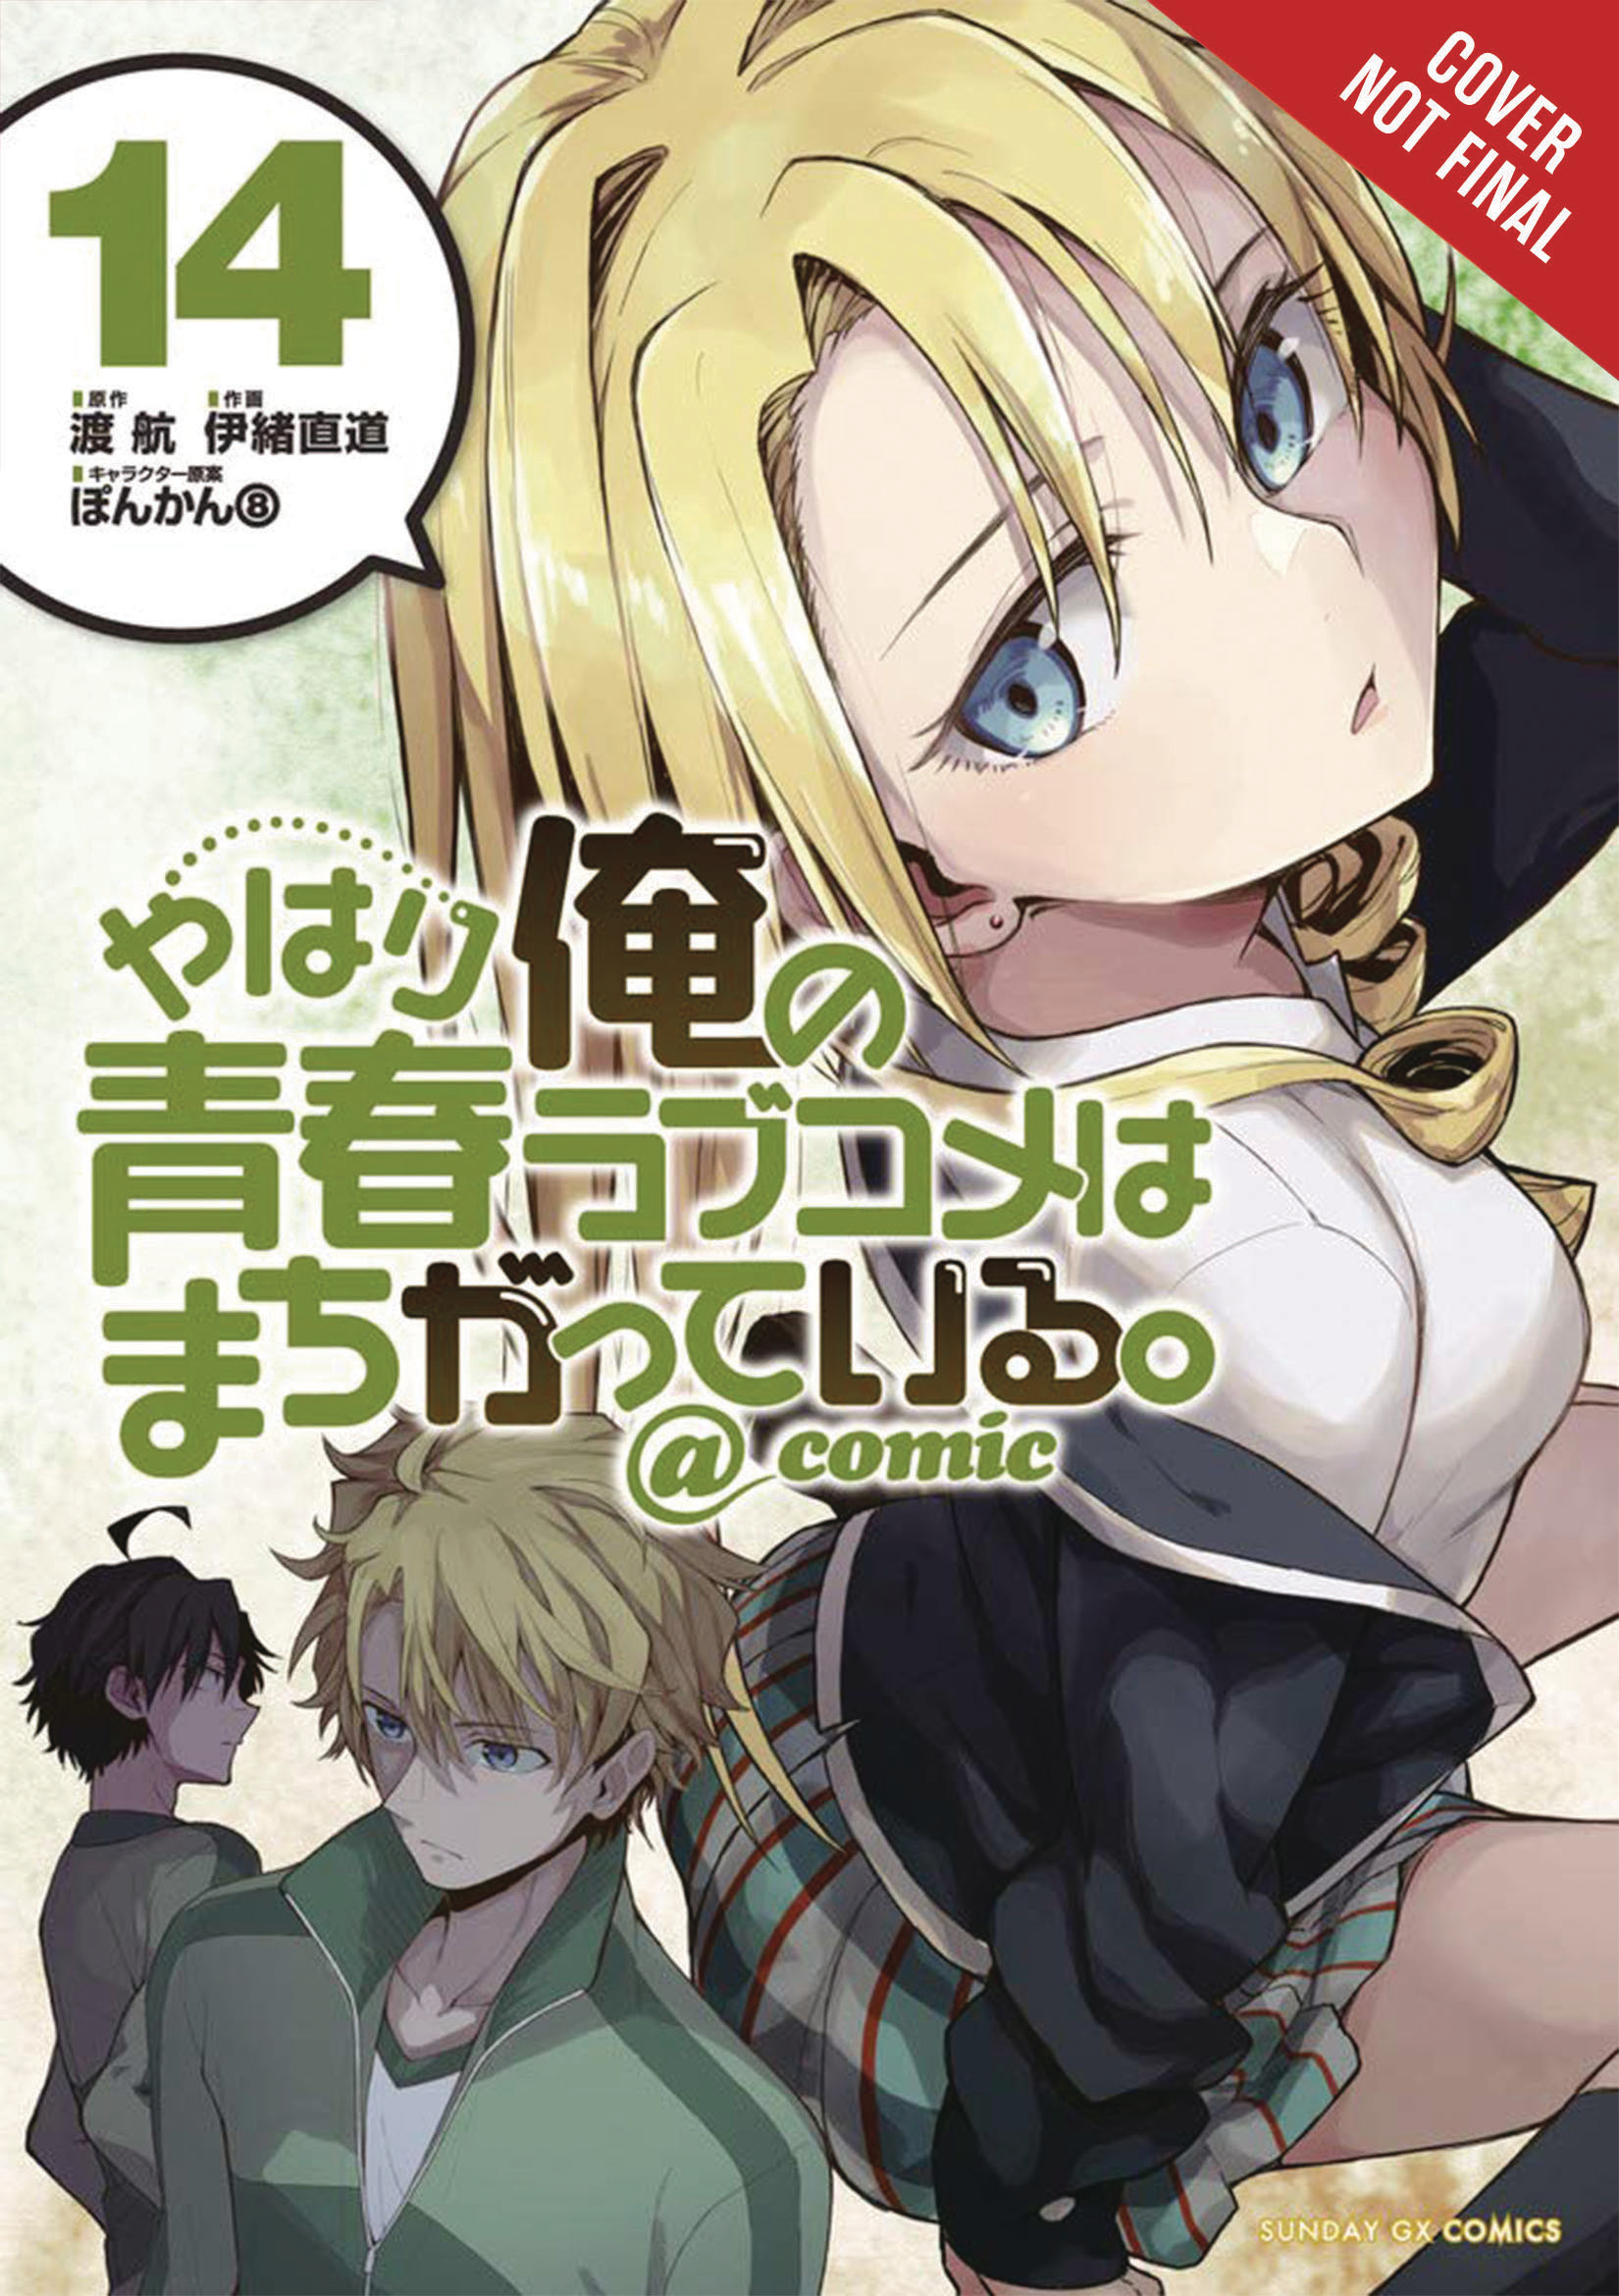 My Youth Romantic Comedy Is Wrong, As I Expected, Vol. 14 (light novel) (My  Youth Romantic Comedy Is Wrong, As I Expected, 14)